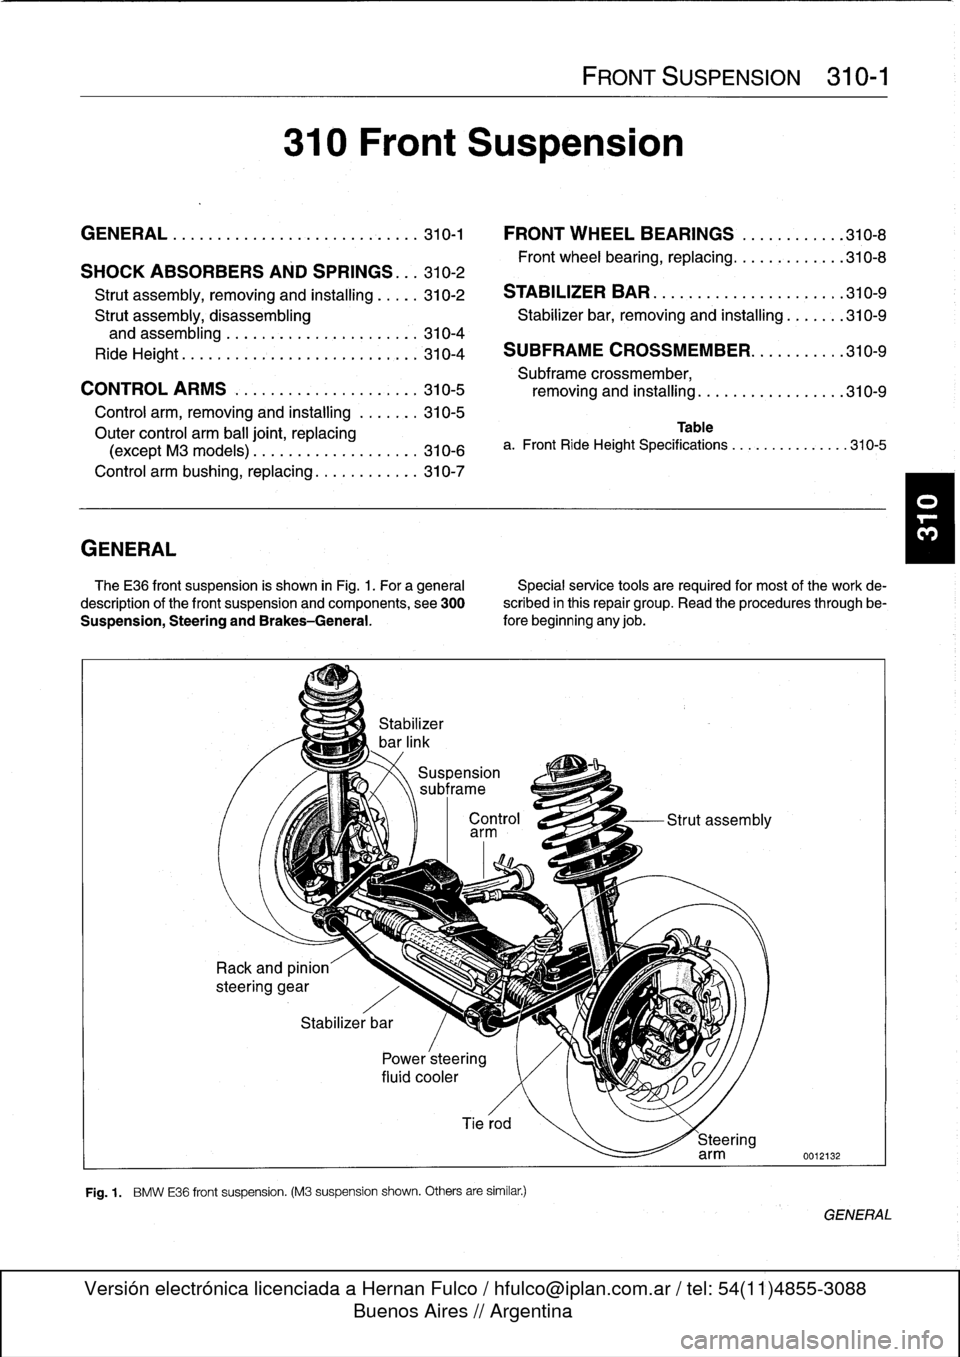 BMW 318i 1997 E36 User Guide 
GENERAL

310
Front
Suspension

GENERAL
..
.
.
.
.
.
.
.
.
.
.......
.
........
.
310-1

	

FRONT
WHEEL
BEARINGS
..
.
.
.
.......
310-8

SHOCK
ABSORBERS
AND
SPRINGS
..
.
310-2

	

Front
wheel
bearing,